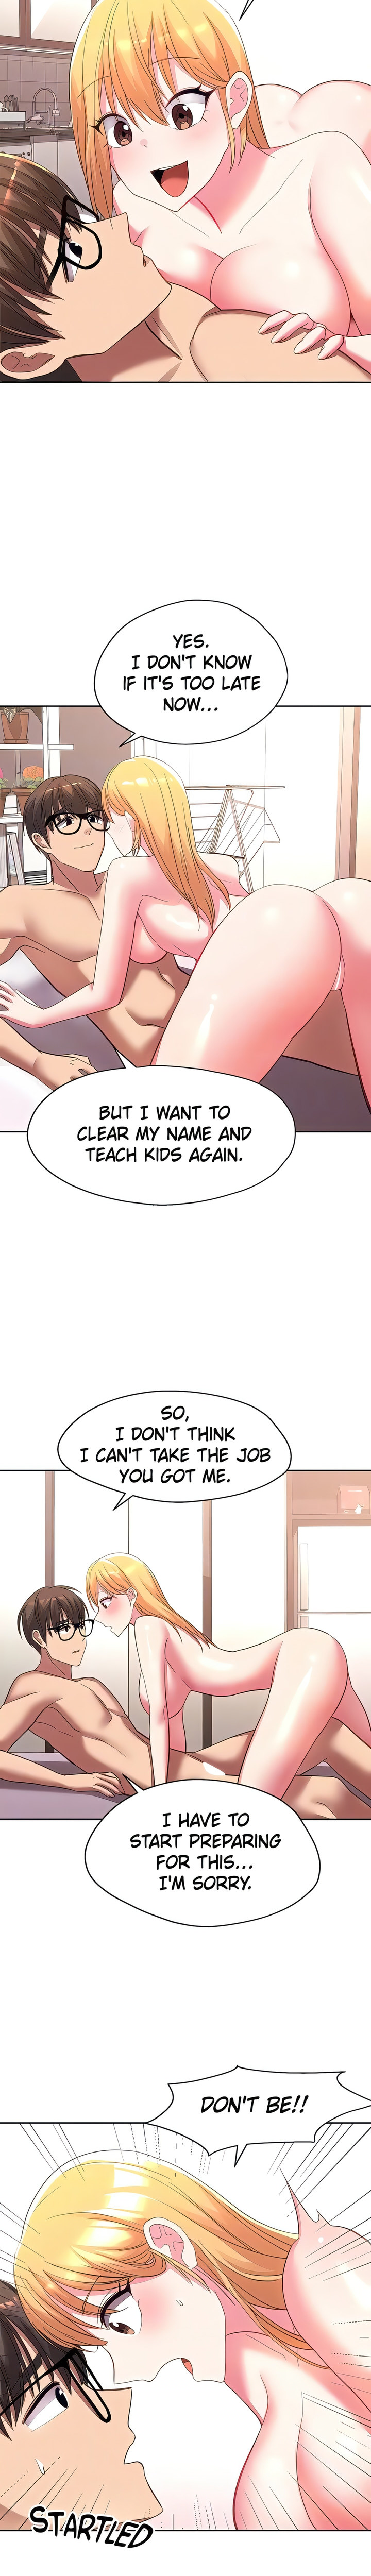 Girls I Used to Teach - Chapter 38 Page 6